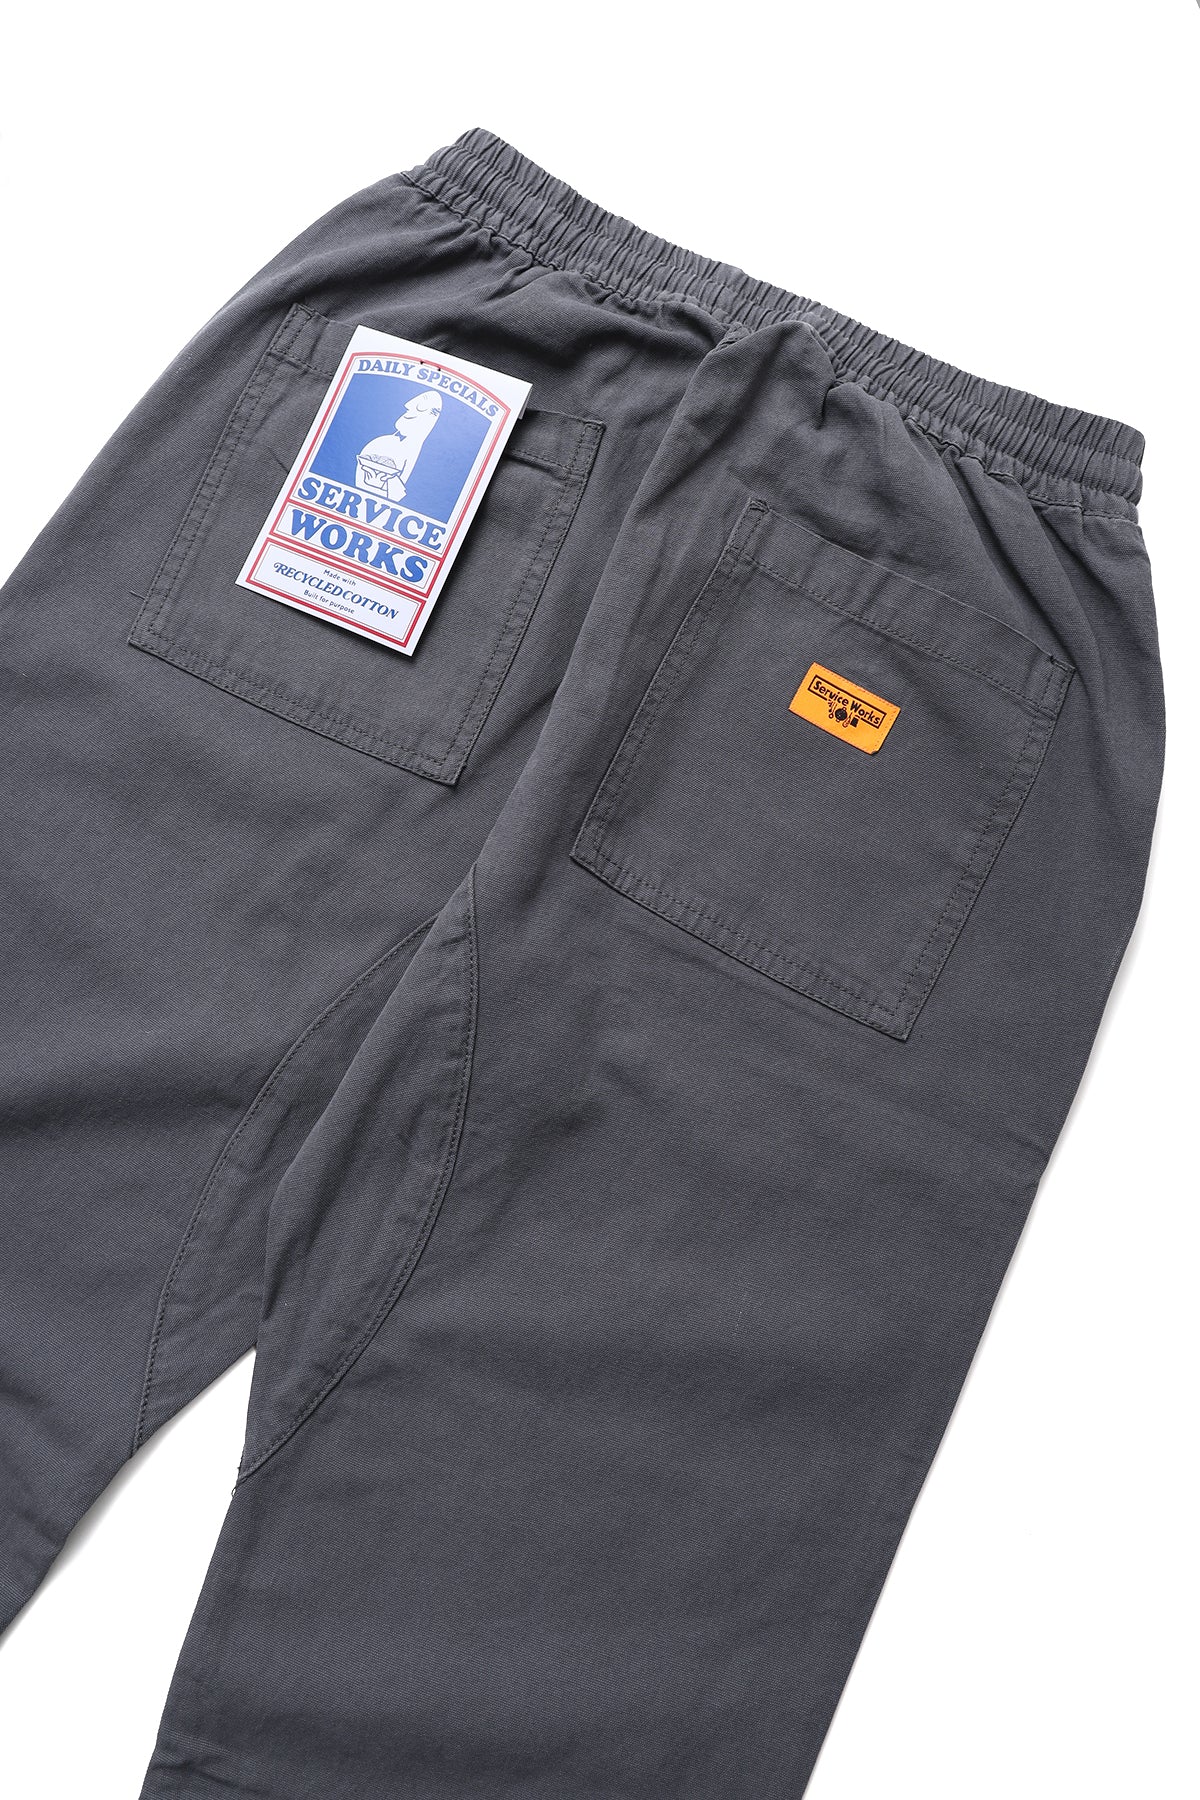 Service Works - Trade Chef Pants - Grey